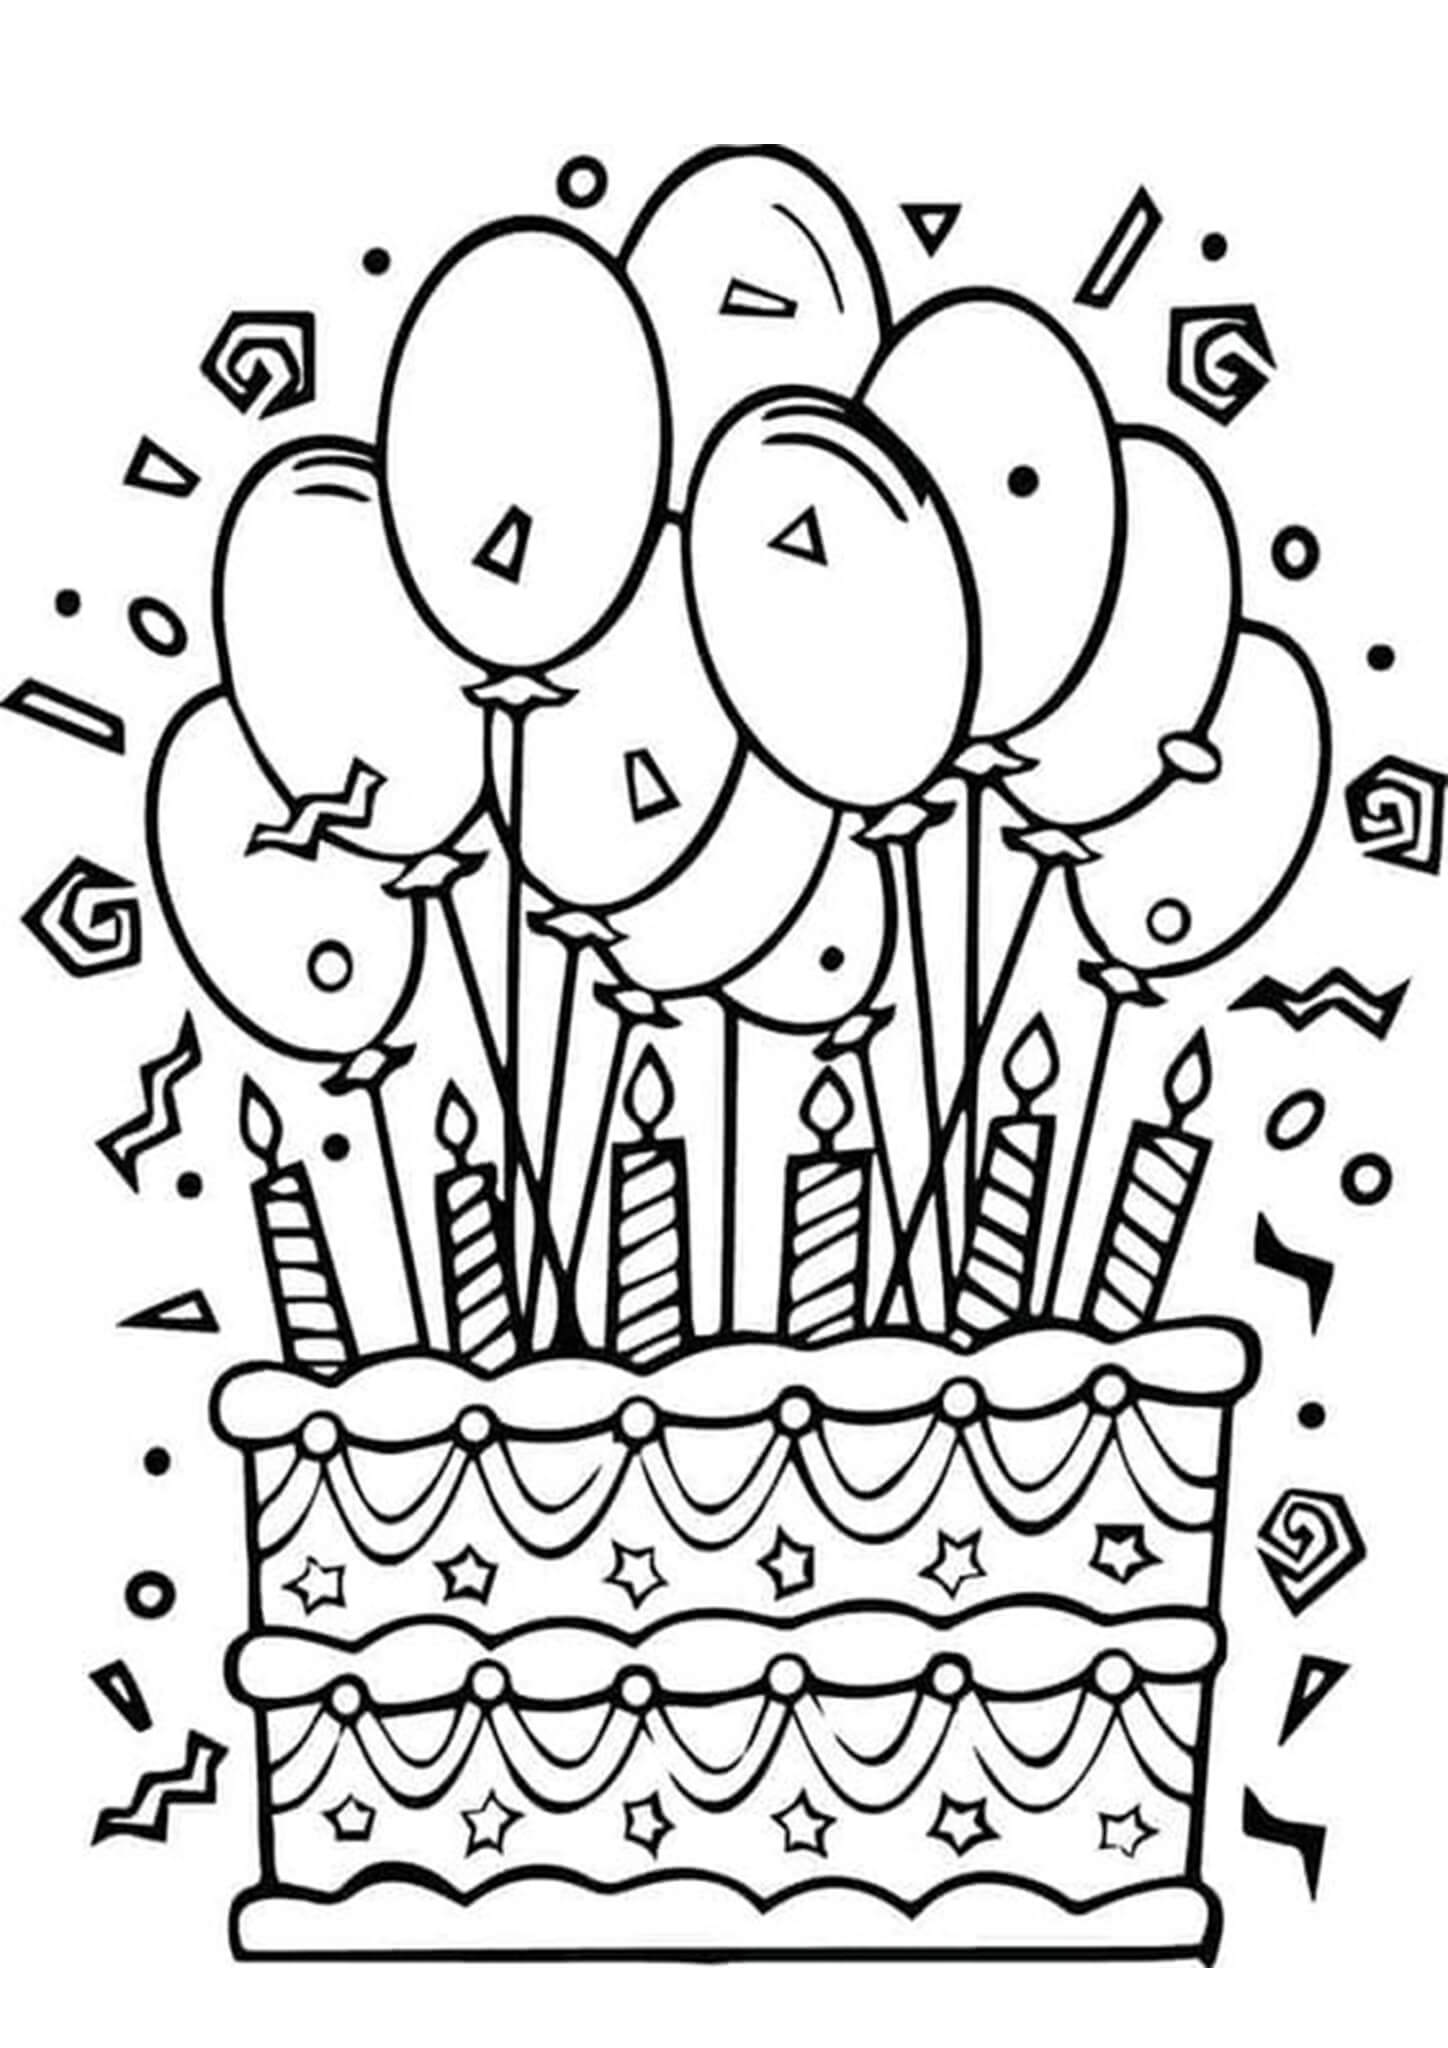 Download Balloons Birthday Cake Coloring Page Free Printable Coloring Pages For Kids